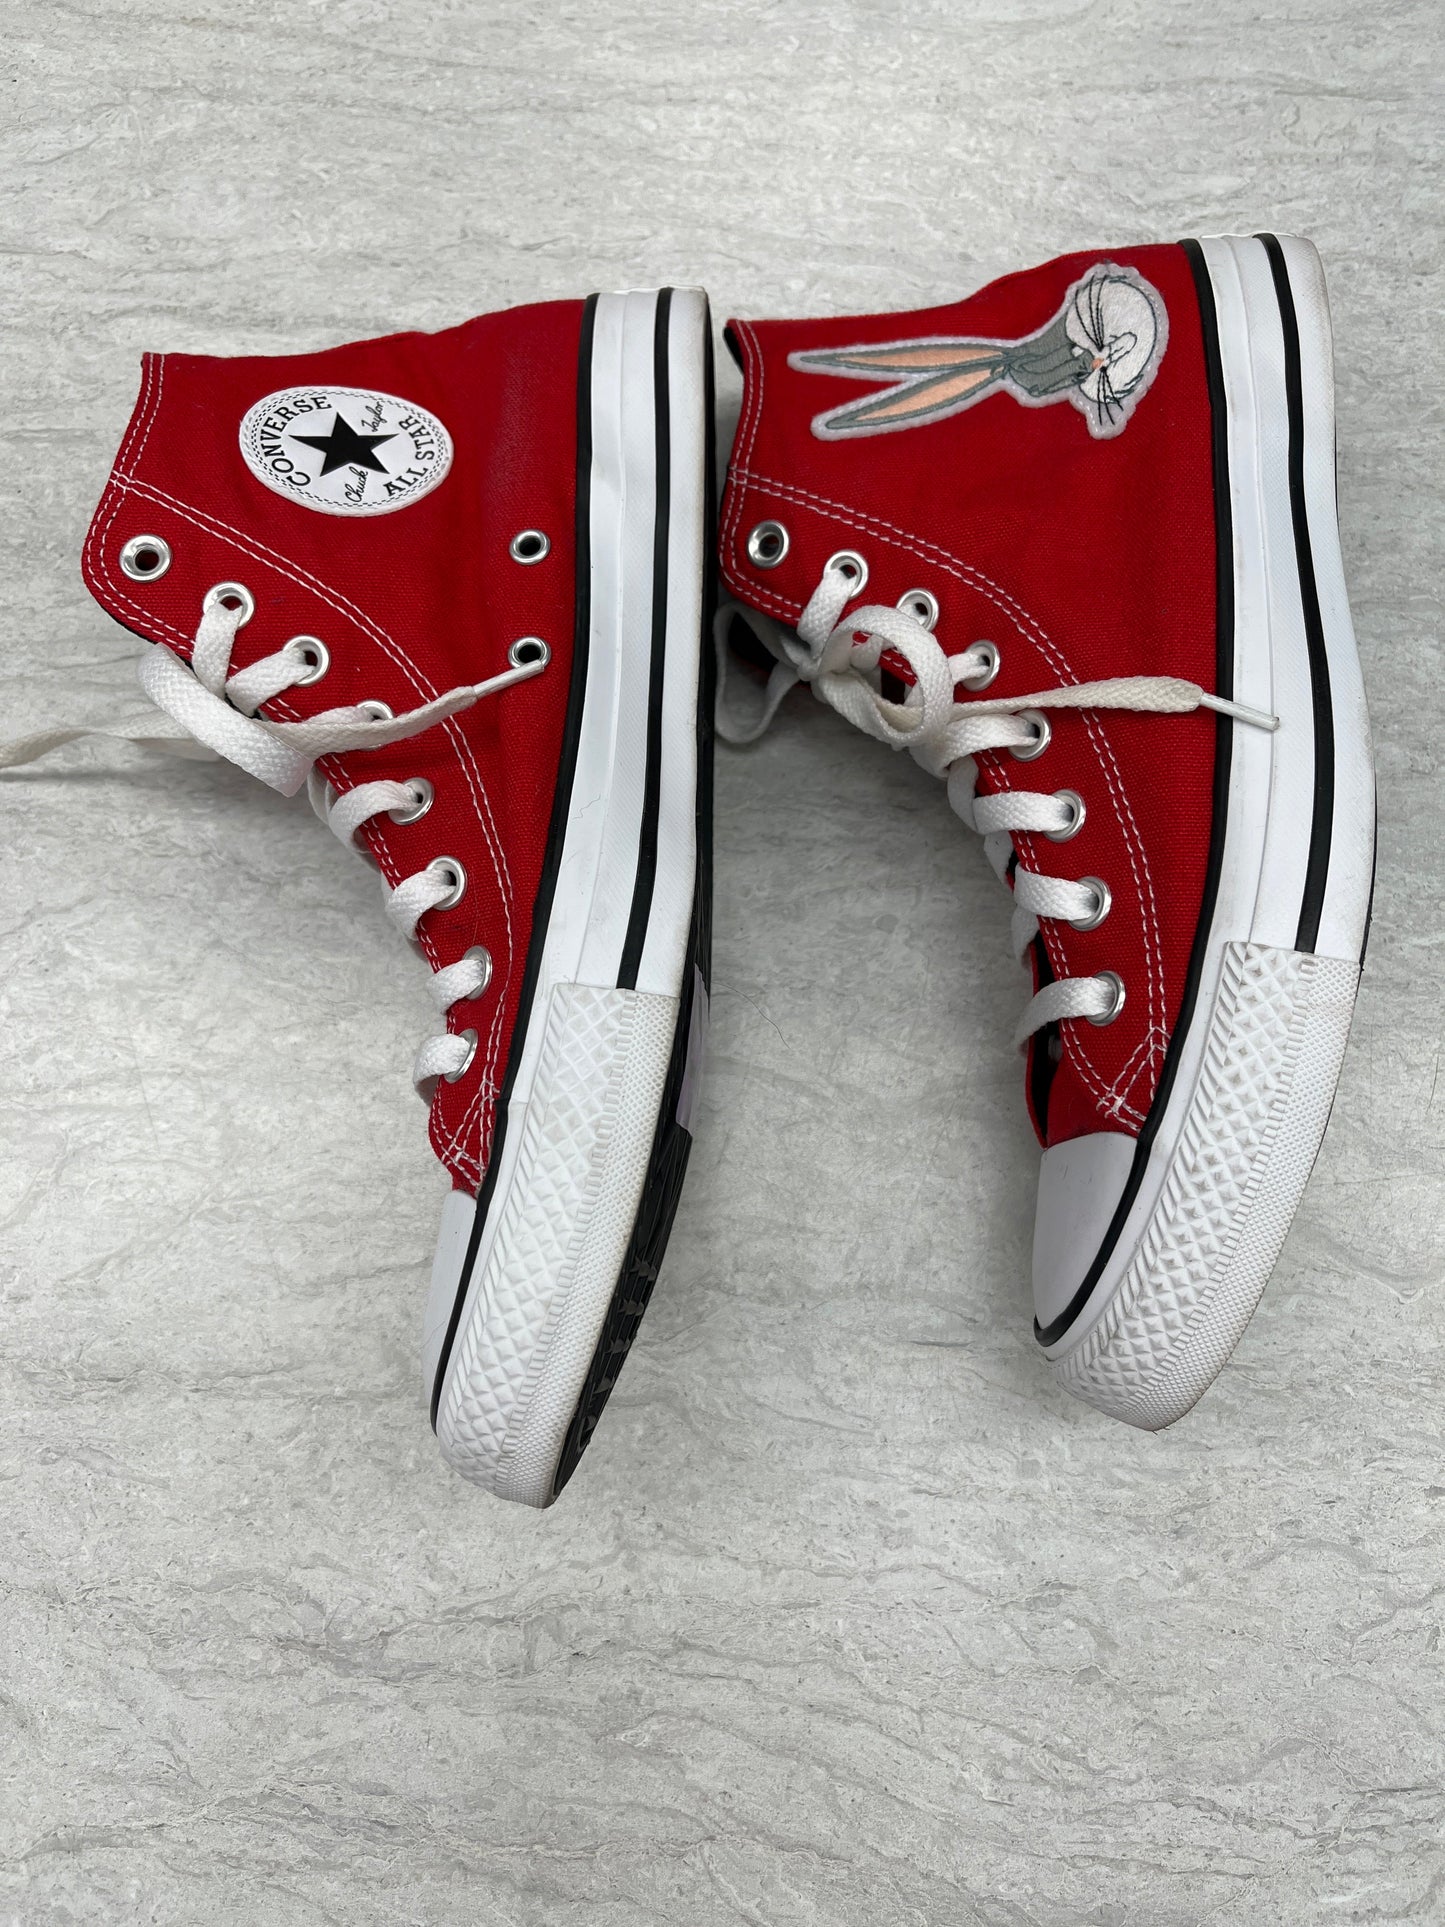 Red Shoes Sneakers Converse, Size 9.5